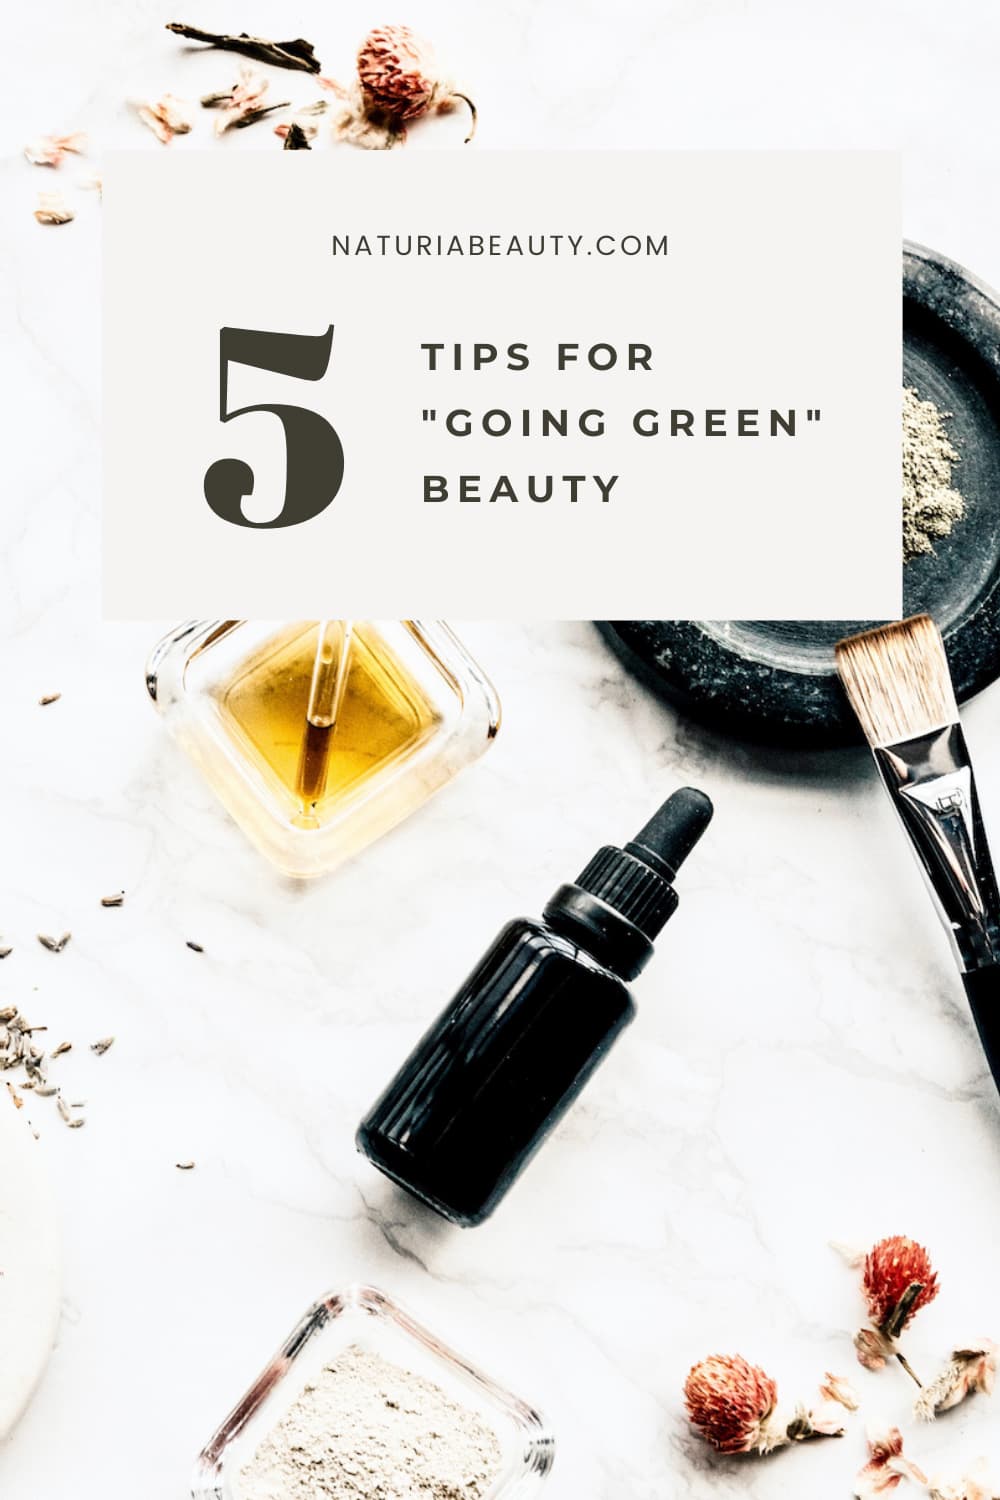 Tips for how to switch to natural / organic / clean beauty products